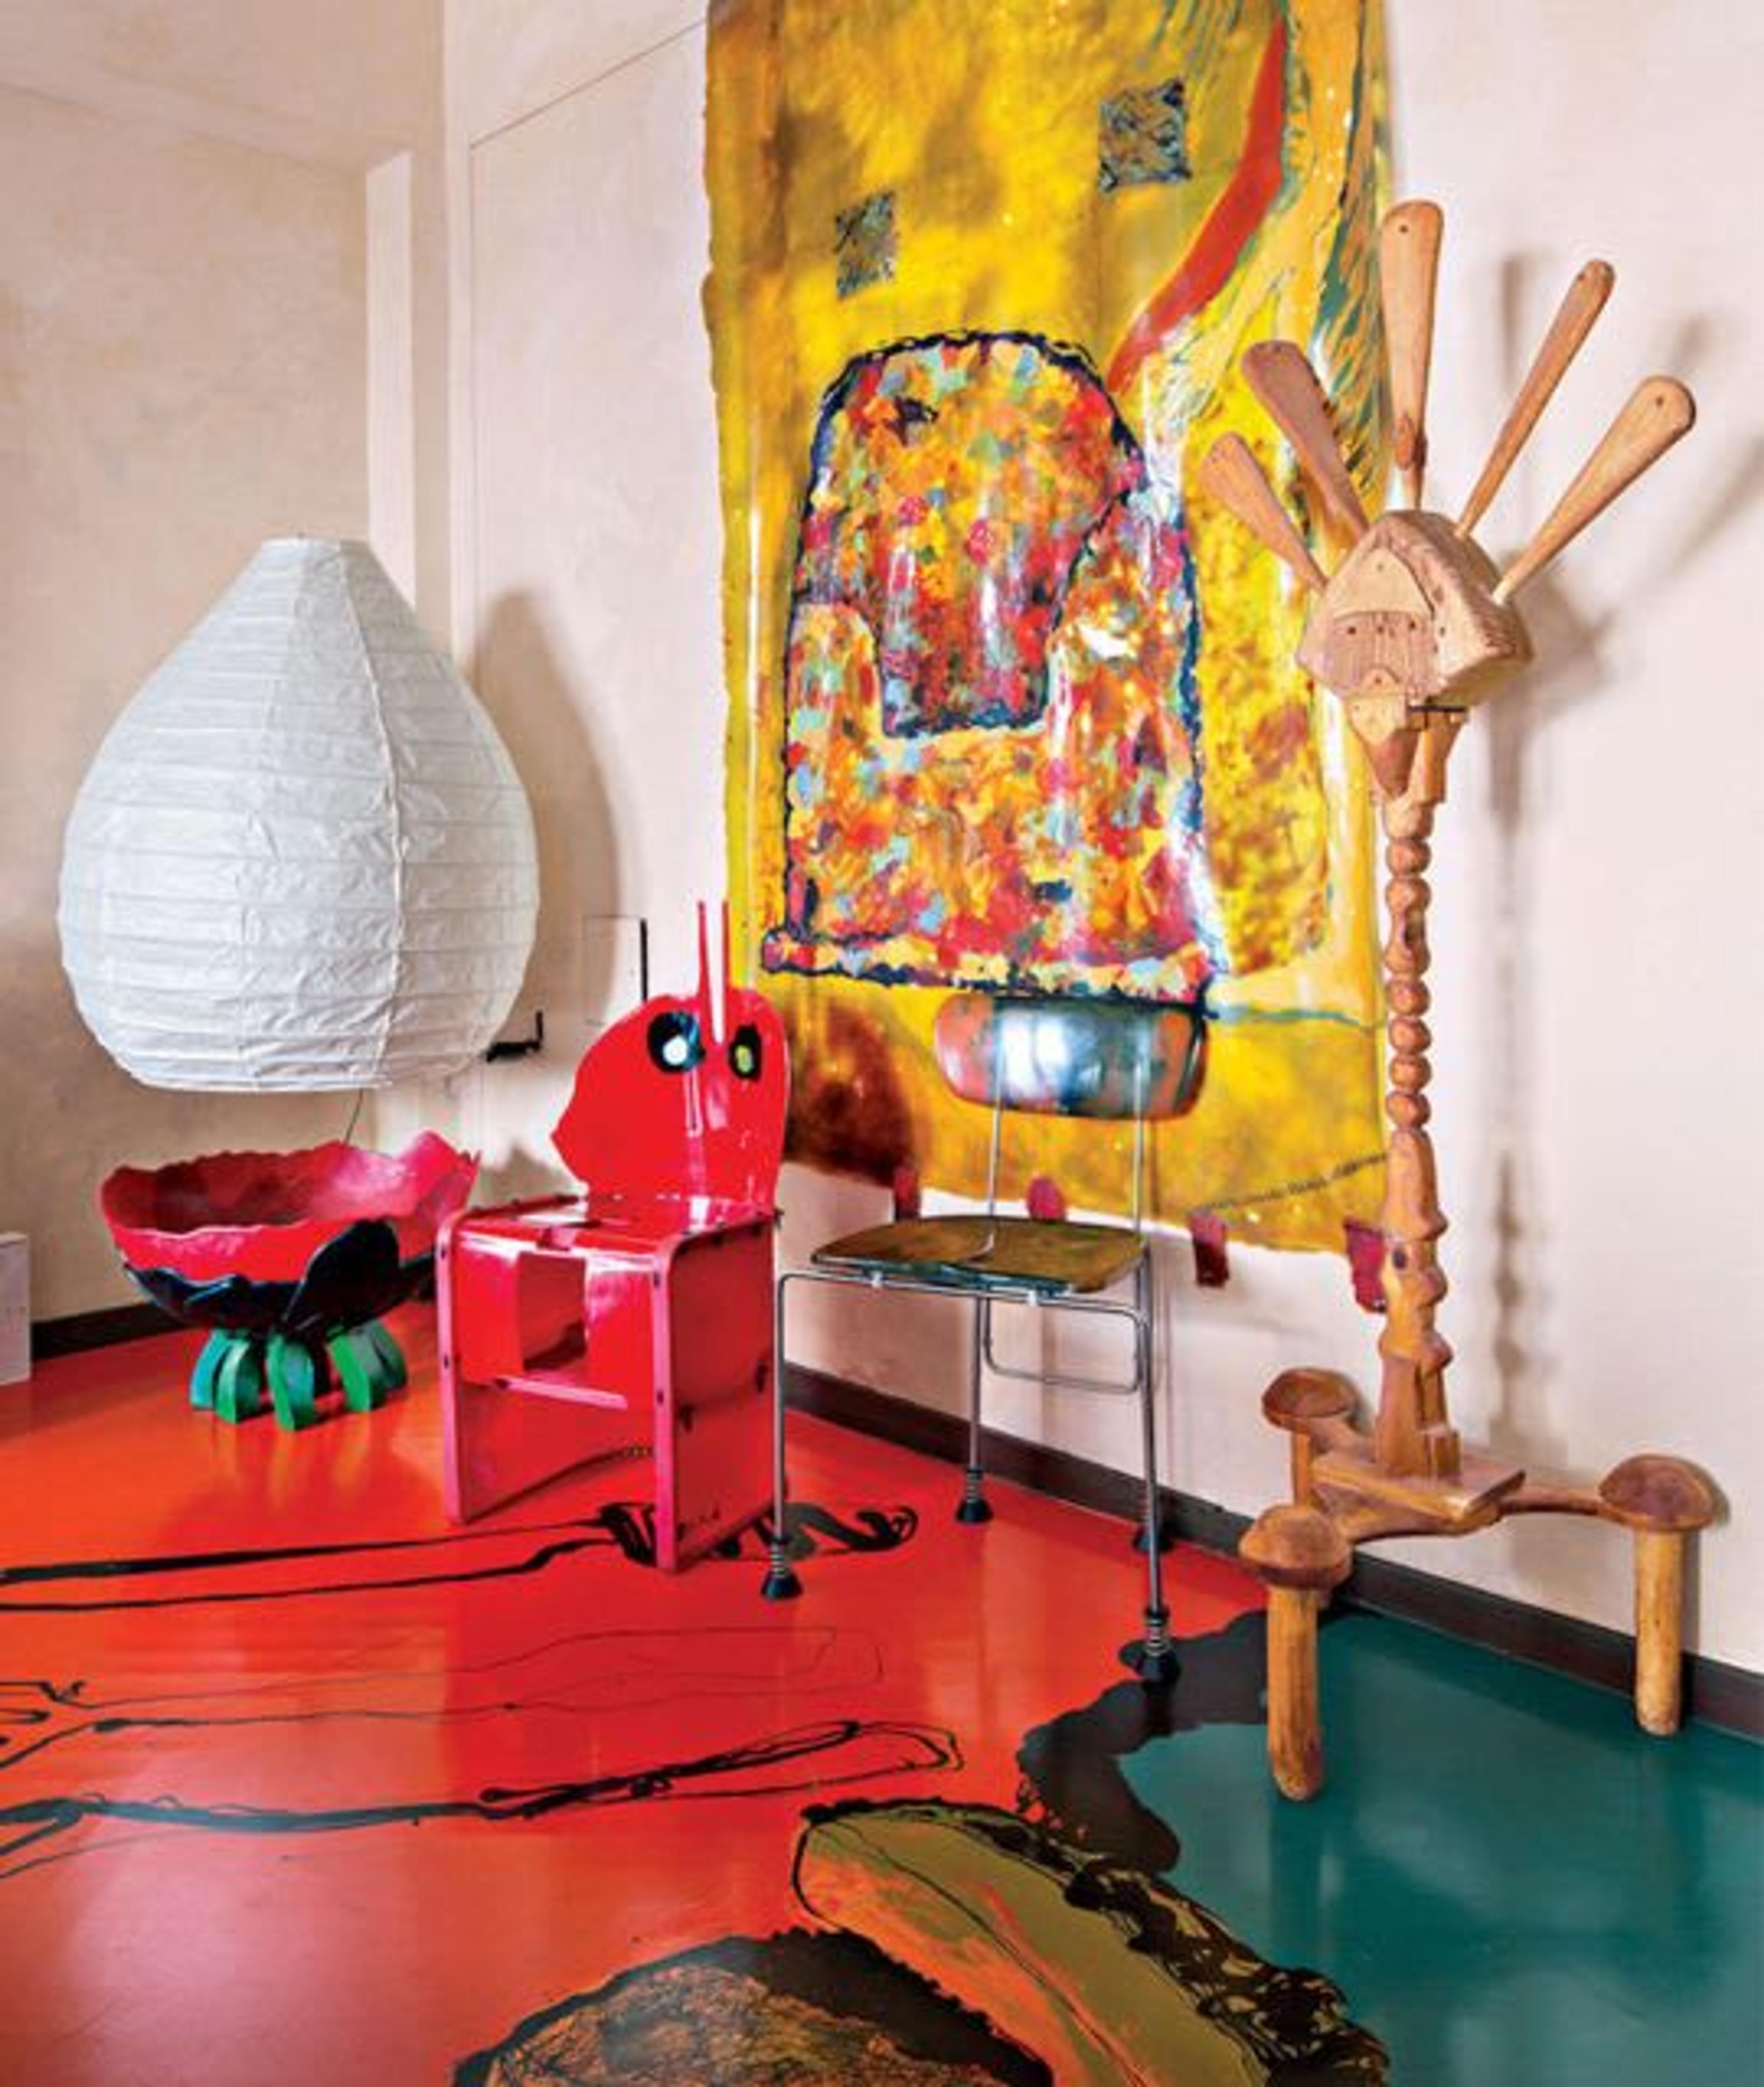 Details of Ruth Shuman New York apartment featuring striking designs by Gaetano Pesce